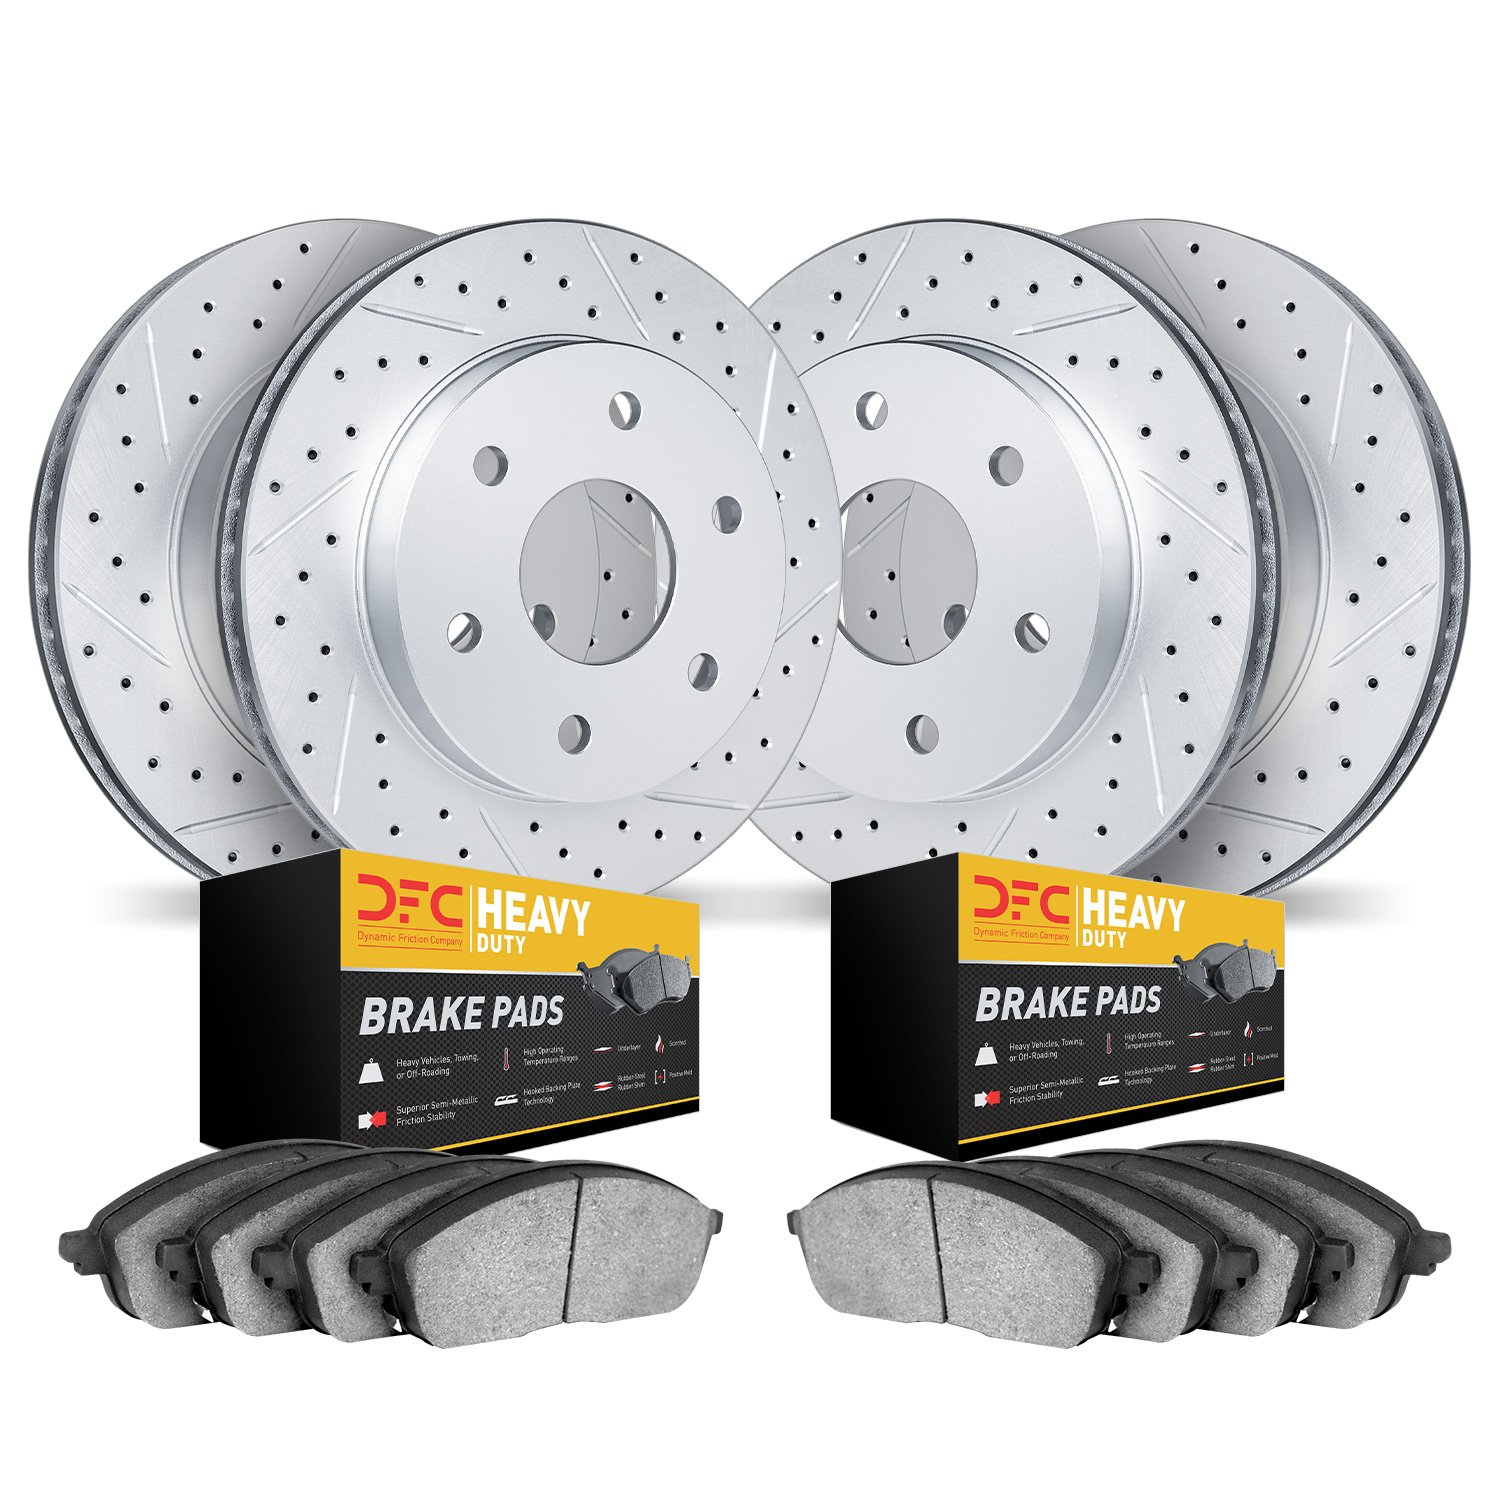 2204-40055 Geoperformance Drilled/Slotted Rotors w/Heavy-Duty Pads Kit, Fits Select Multiple Makes/Models, Position: Front and R